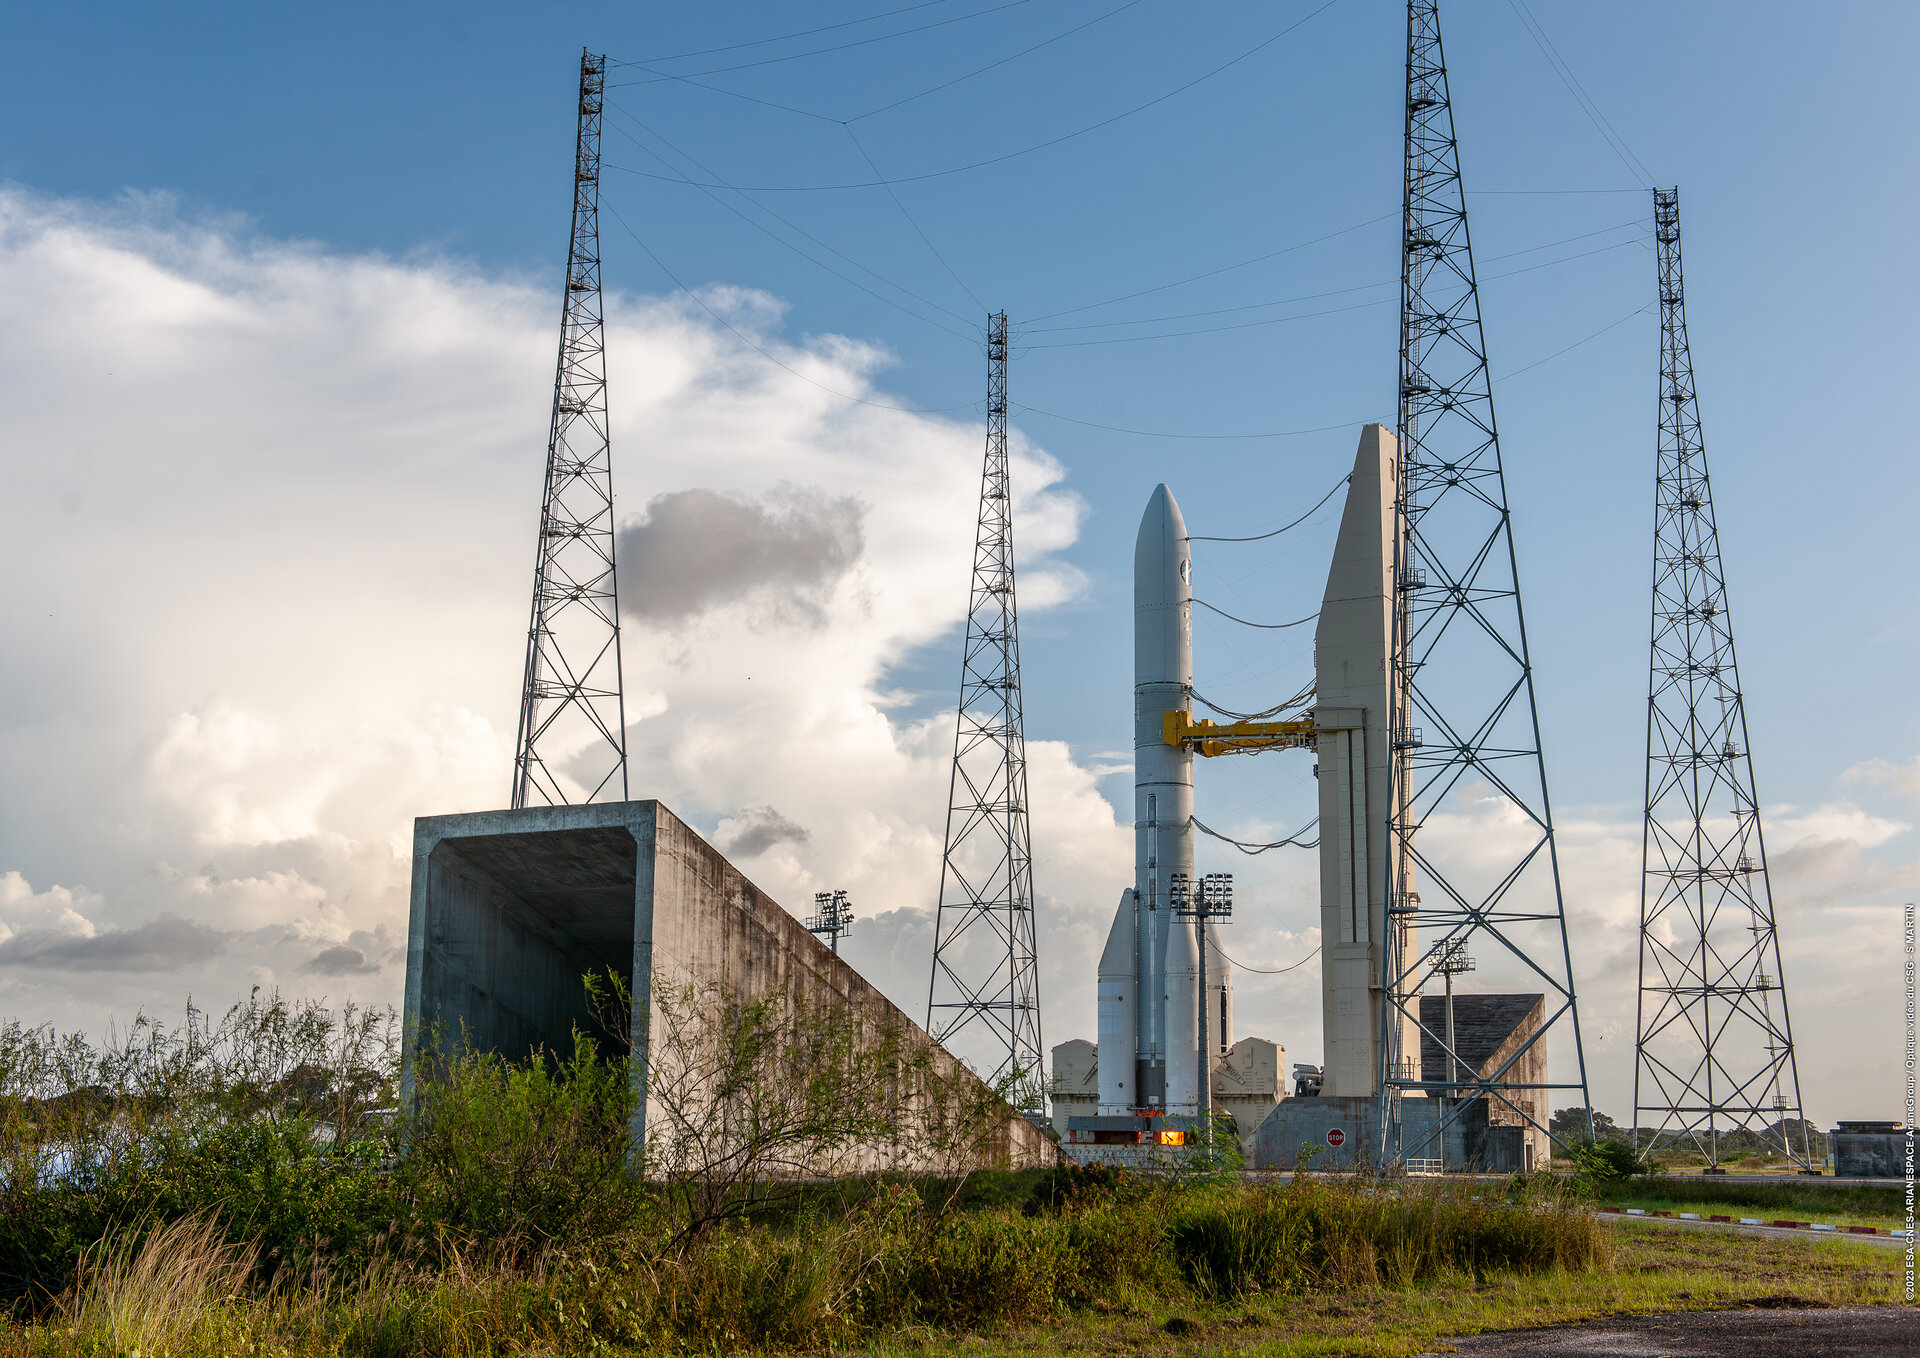 Work is ongoing at Europe’s Spaceport in French Guiana to validate the performance of the Ariane 6 launch vehicle and its ground infrastructure as a complete system. Seen here is the test model of Ariane 6 on its launch pad during recent exercises.  